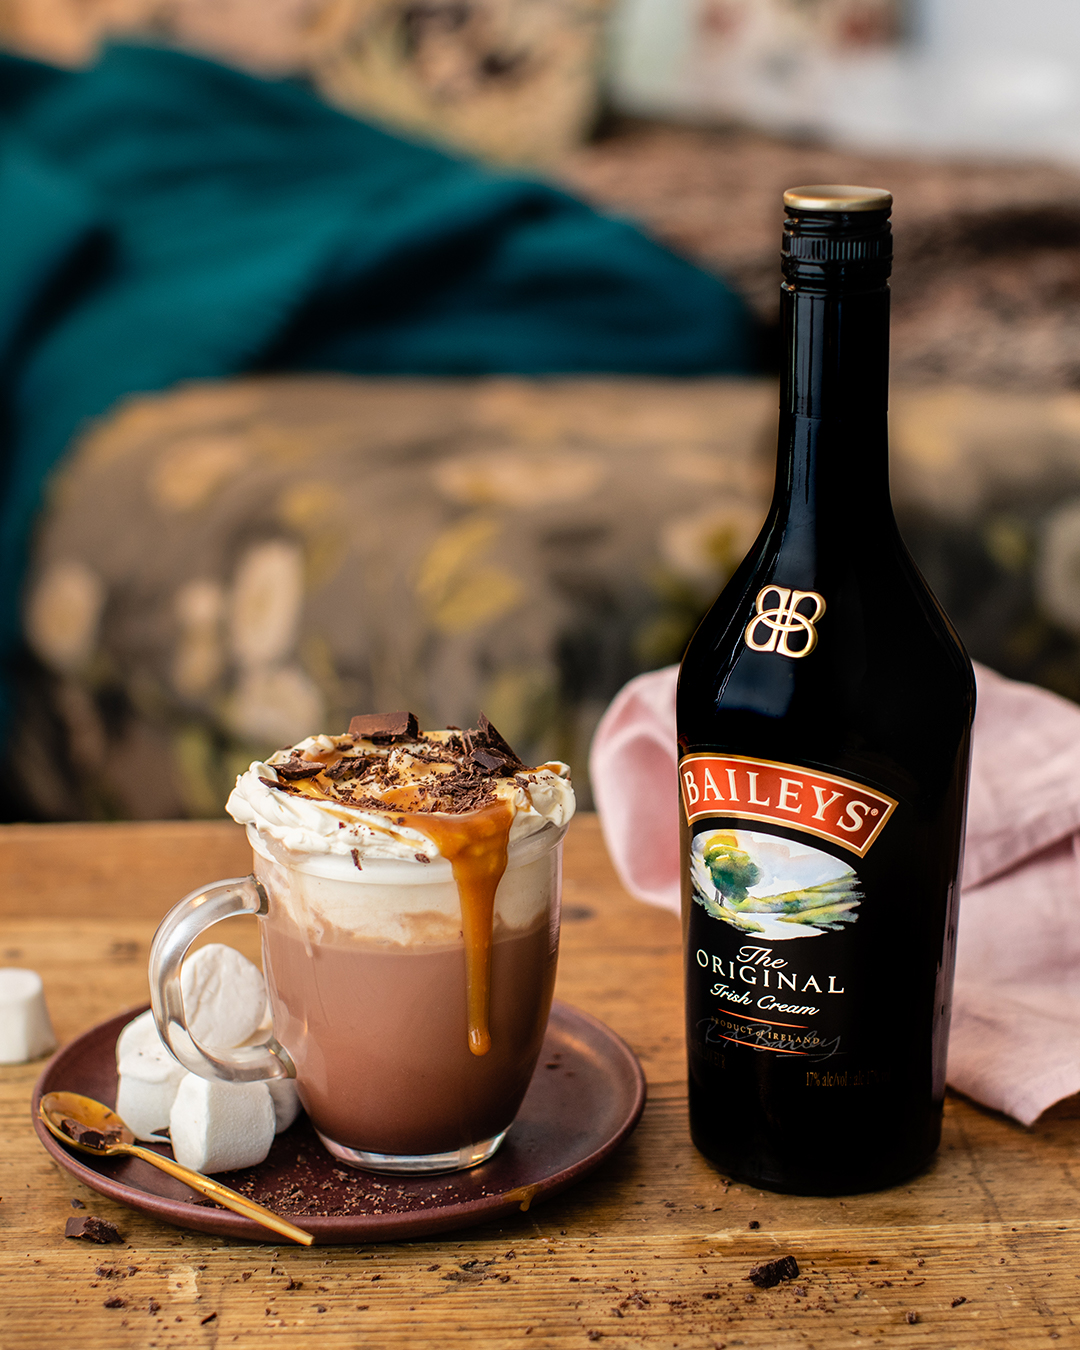 SEASON’S TREATINGS: BAILEYS ORIGINAL IRISH CREAM LIQUEUR BRINGS HOLIDAY SPIRIT TO THE MOST WONDERFUL (AND DELICIOUS) TIME OF THE YEAR